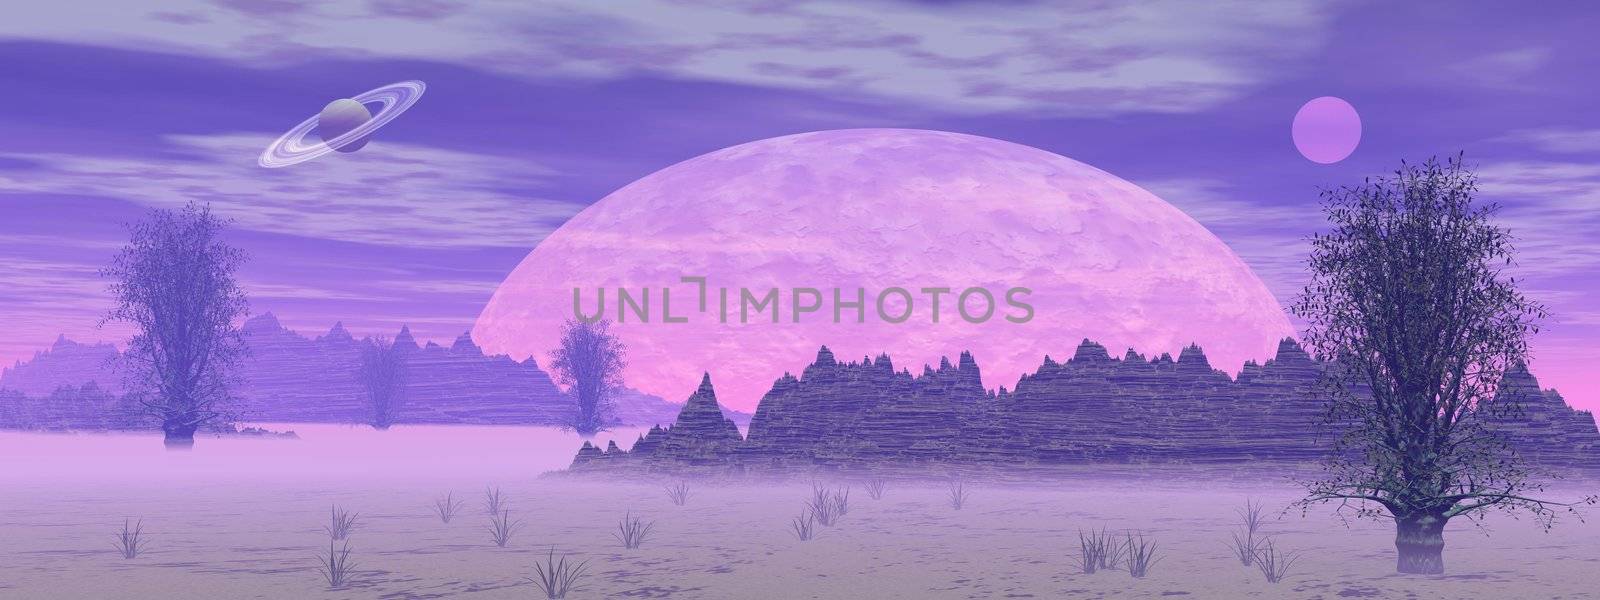 Violet landscape with rock mountains, trees, fog and planets